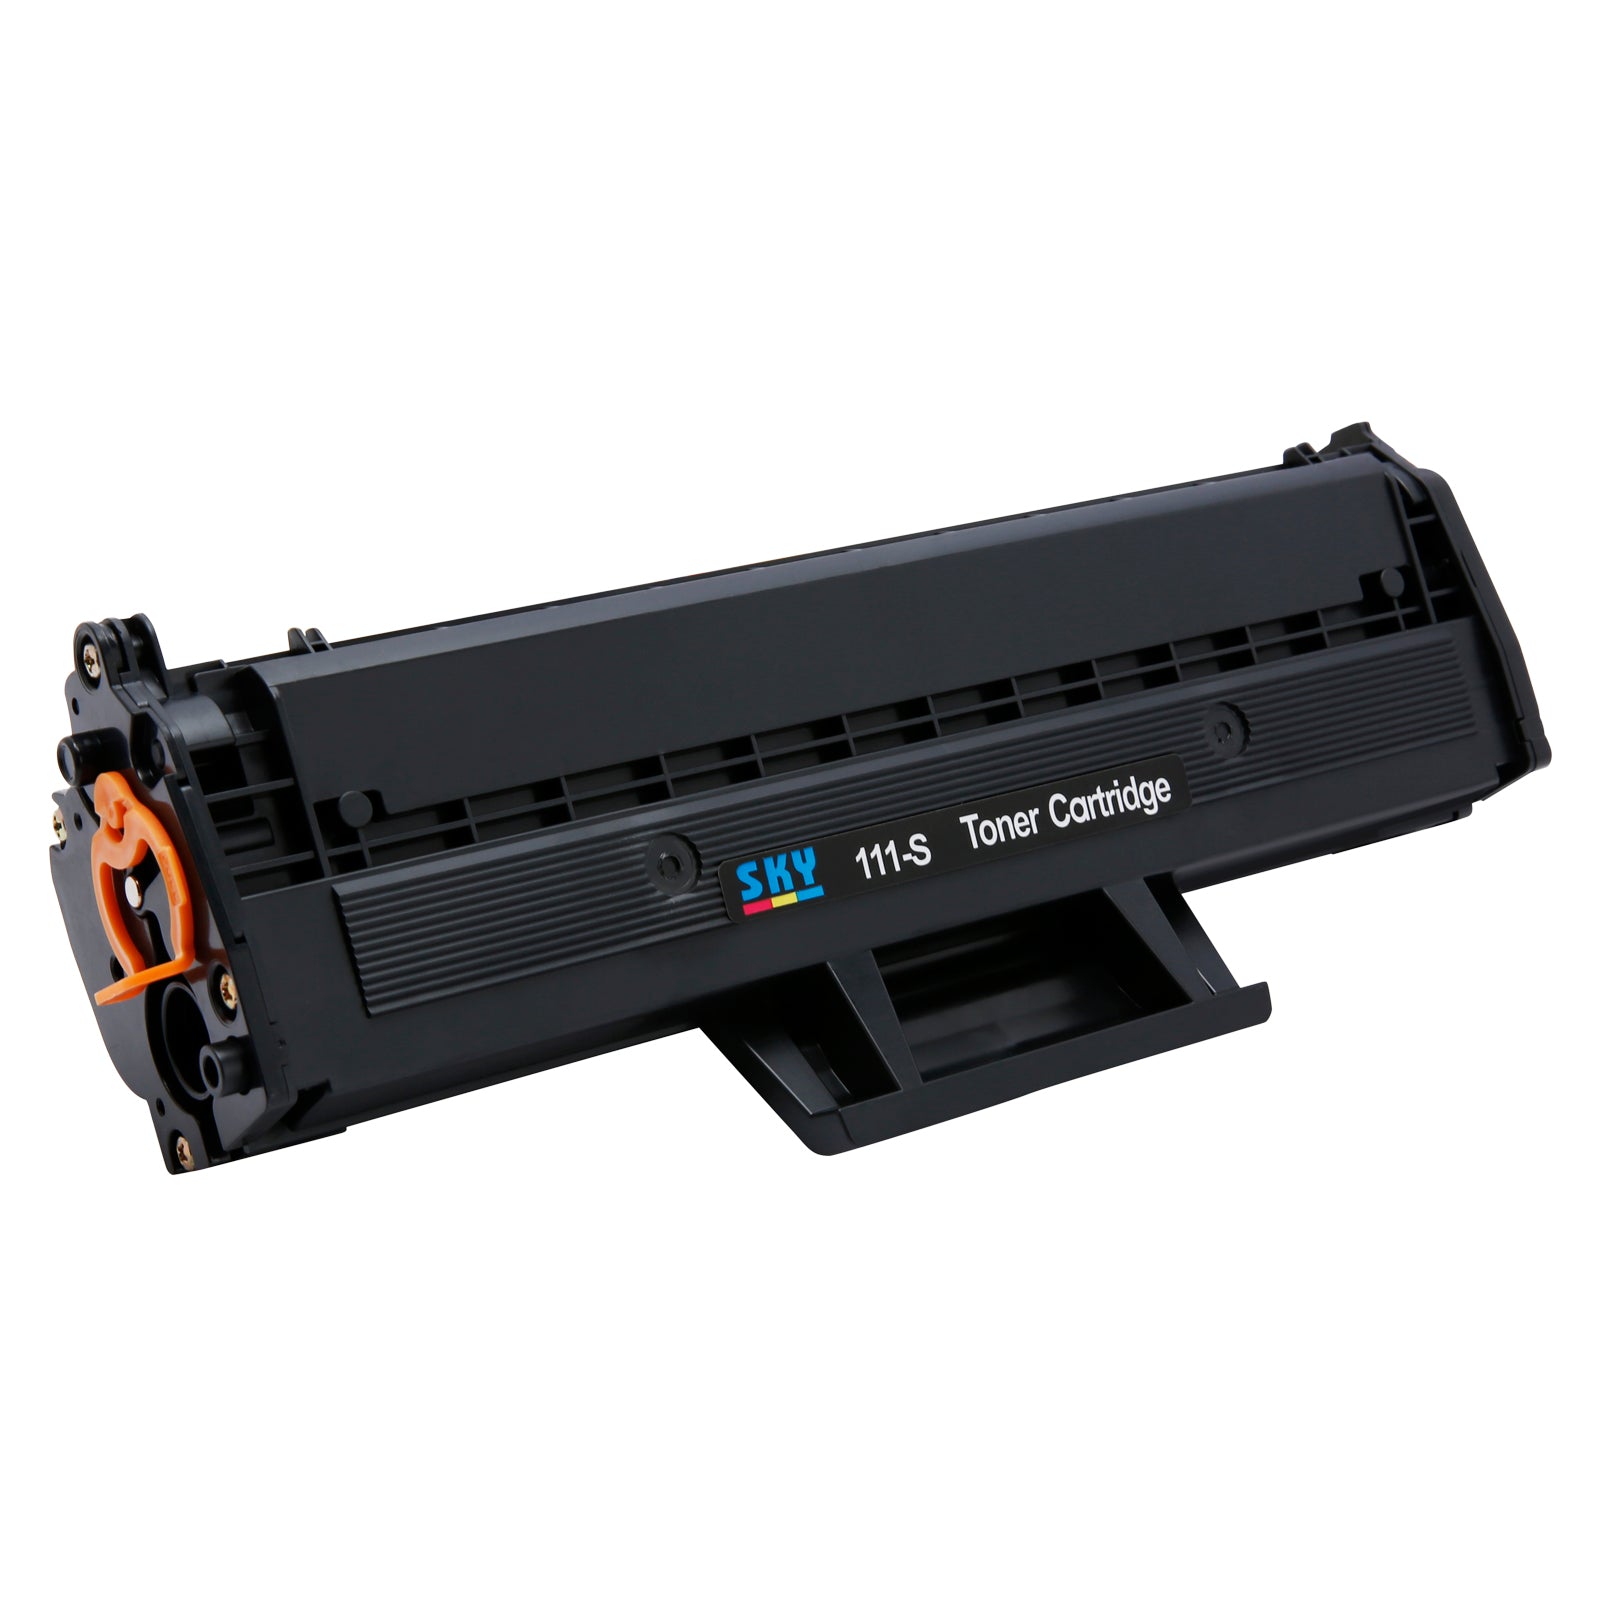 SKY  111 Compatible Toner Cartridge MLT-D111S for Samsung Xpress M2020 and M2070